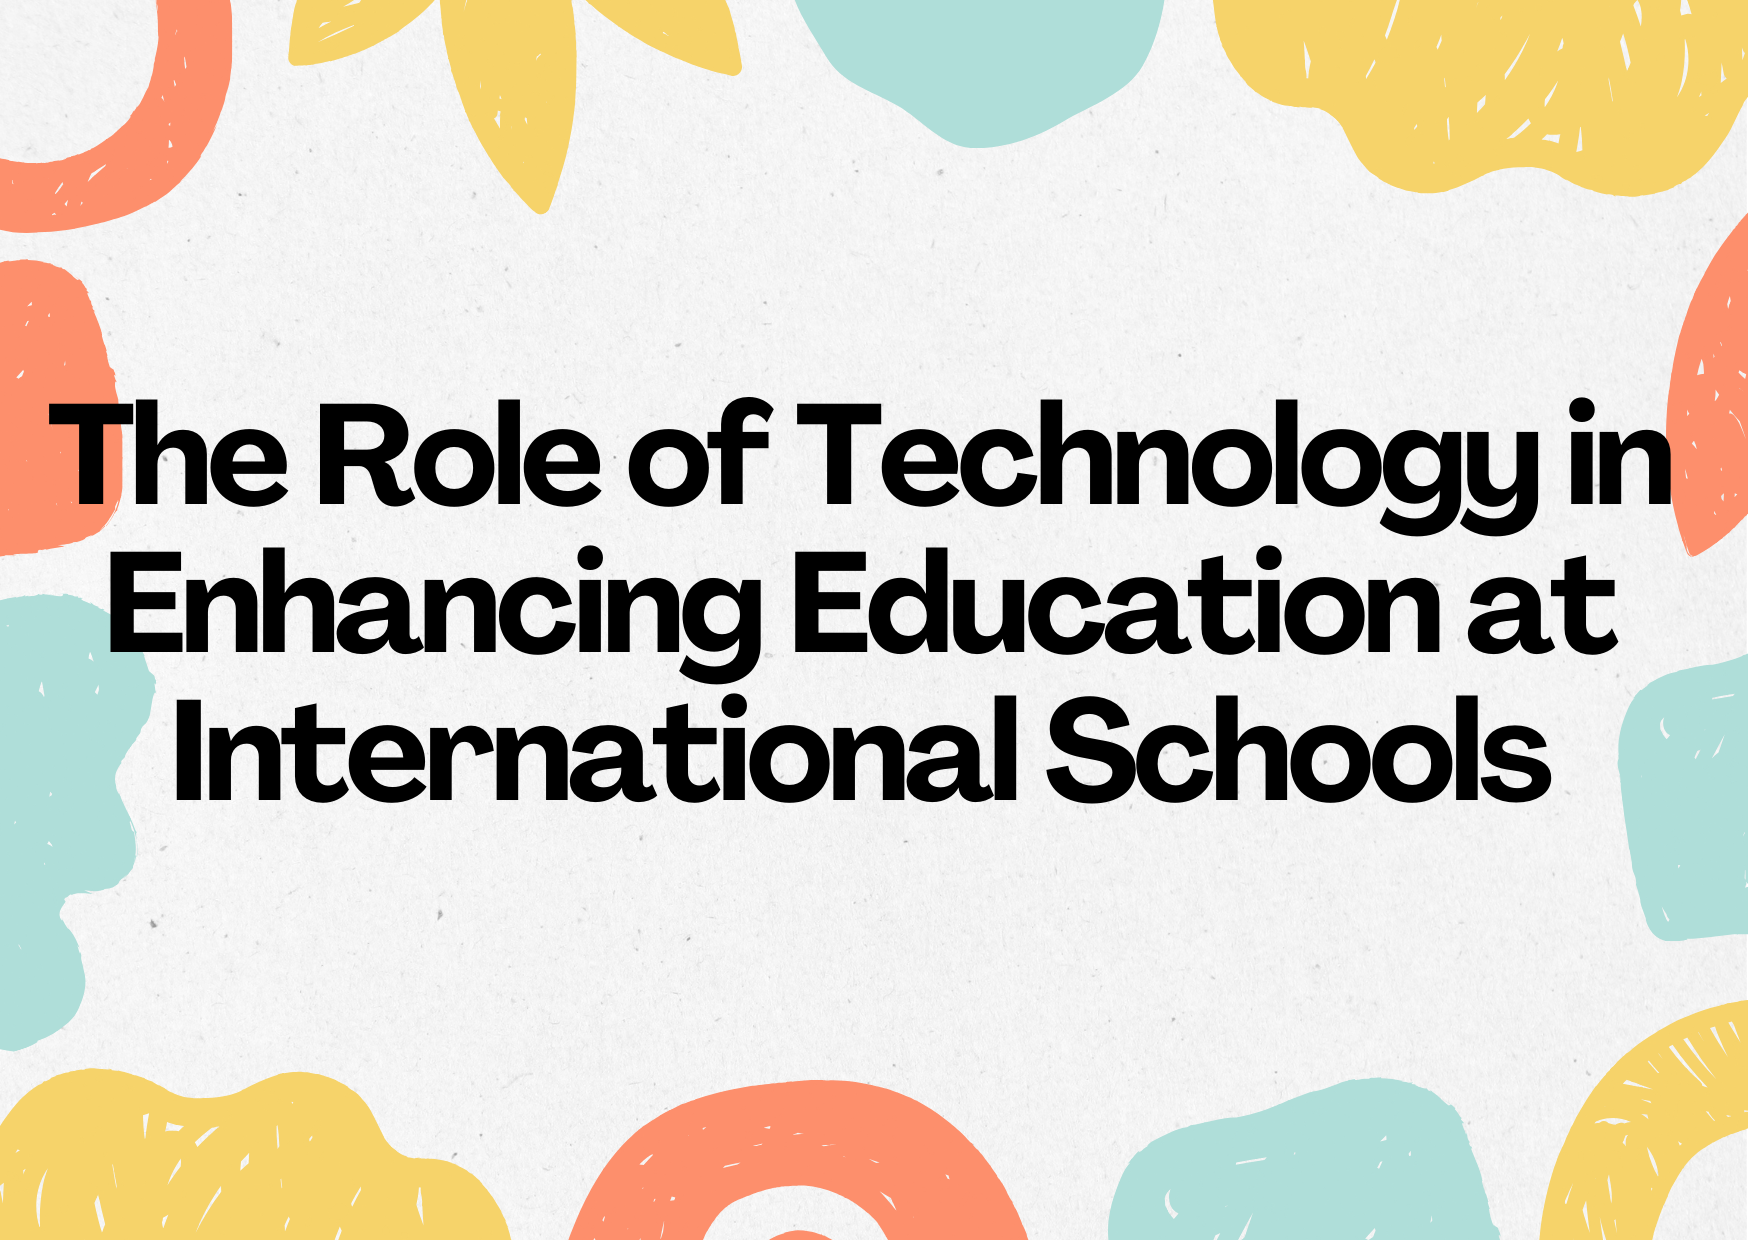 The Role of Technology in Enhancing Education at International Schools